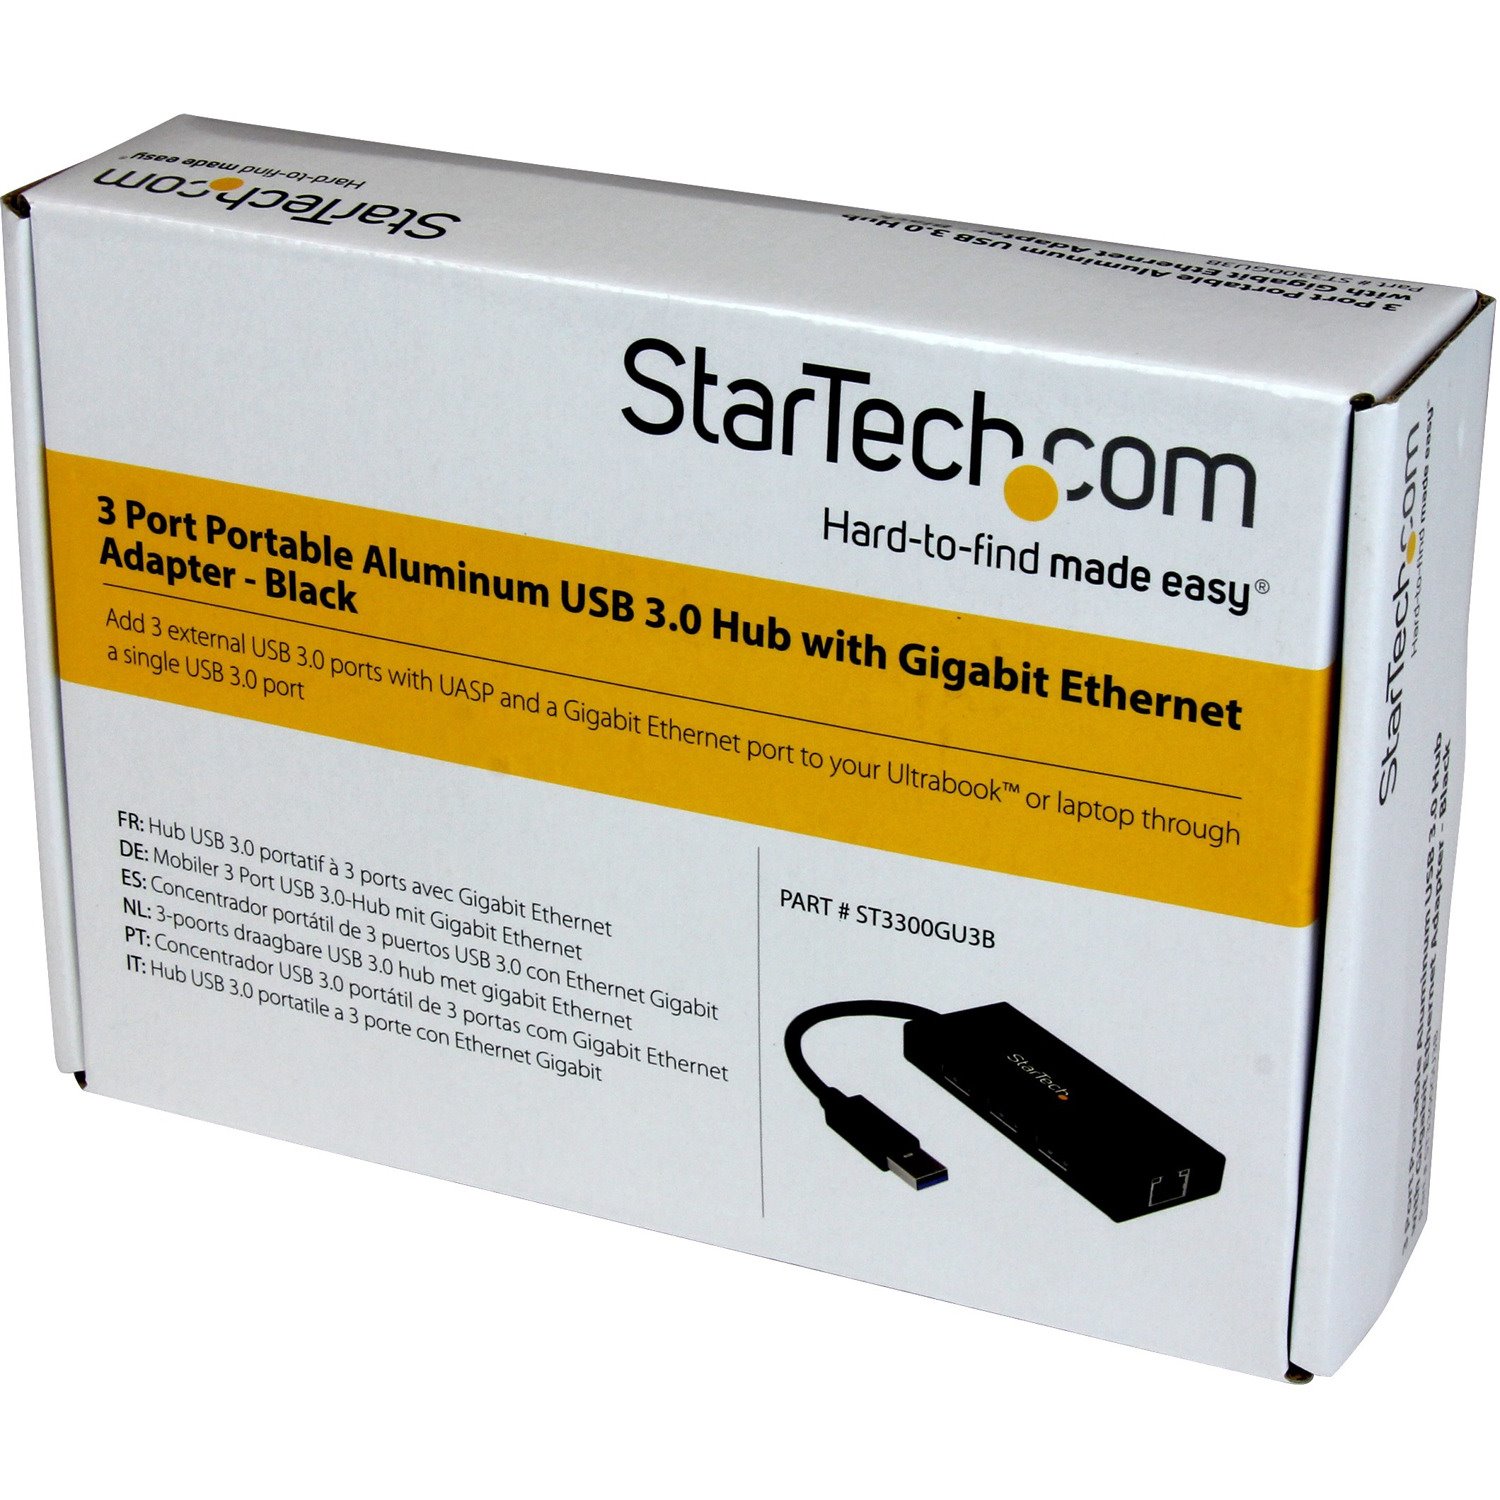 StarTech.com 3 Port Portable USB 3.0 Hub with Gigabit Ethernet Adapter NIC - 5Gbps - Aluminum w/ Cable